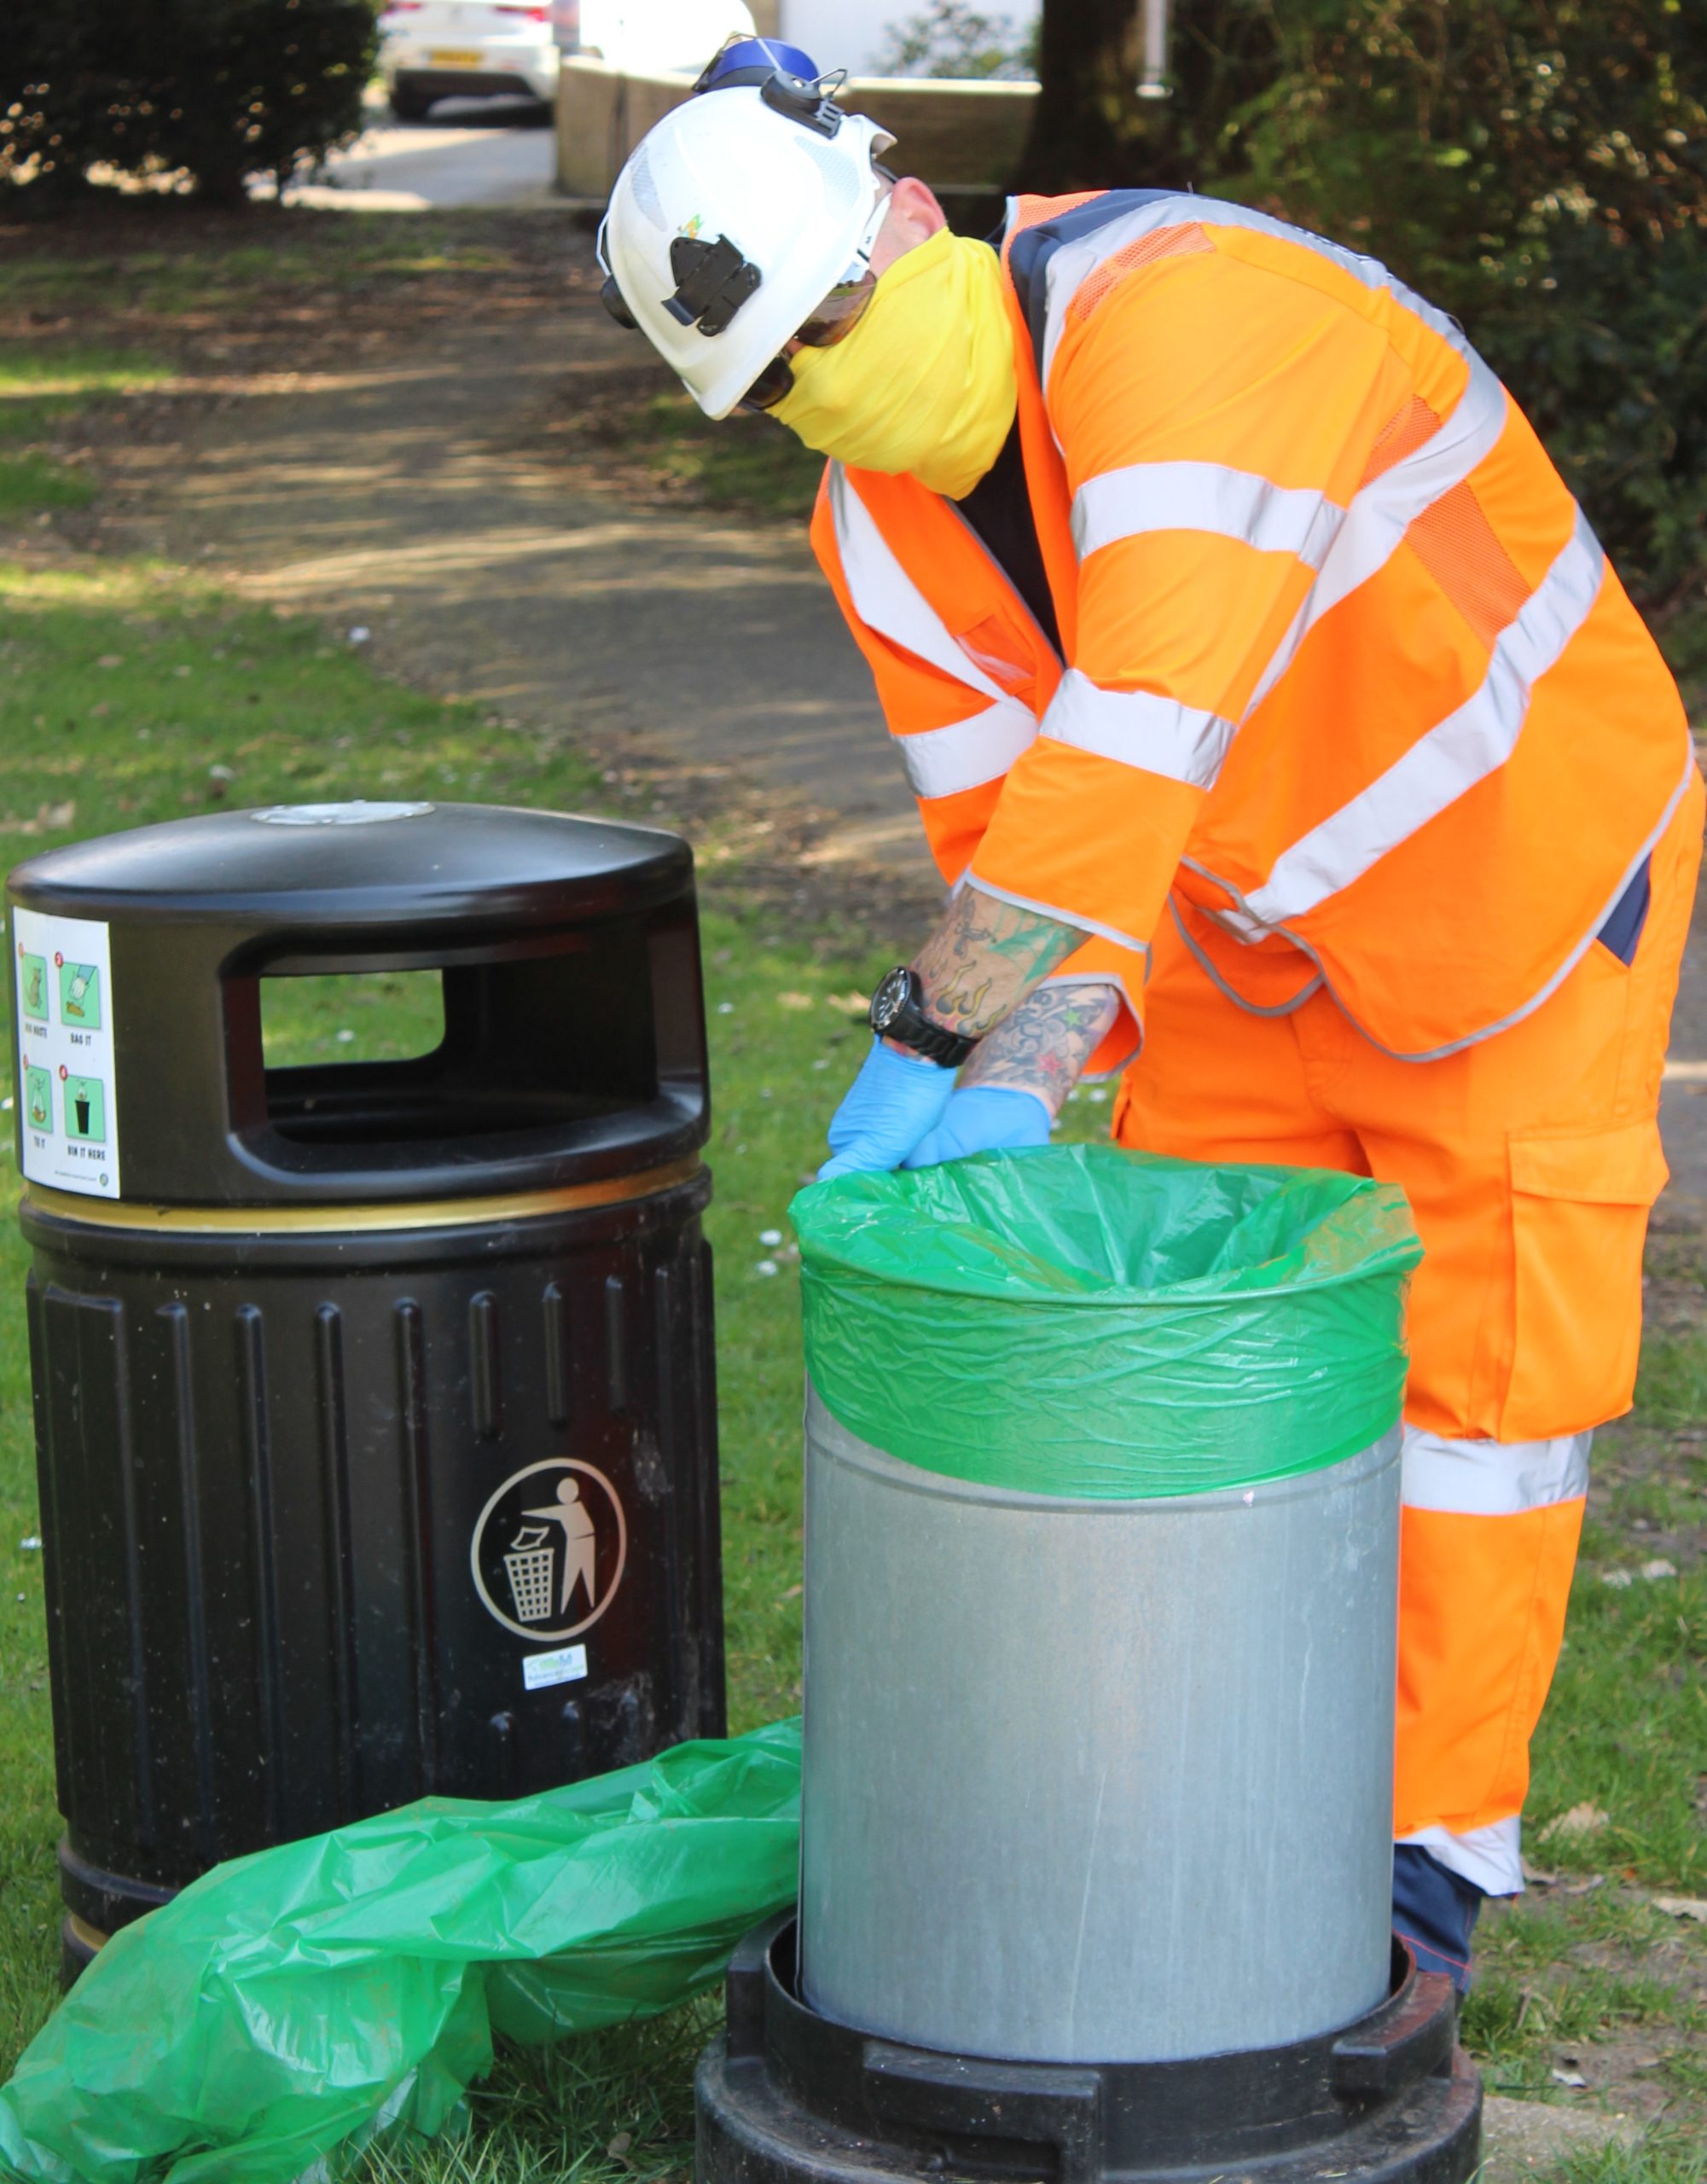 Photo showing Island Roads staff member emptying litter bins dressed in protective clothing